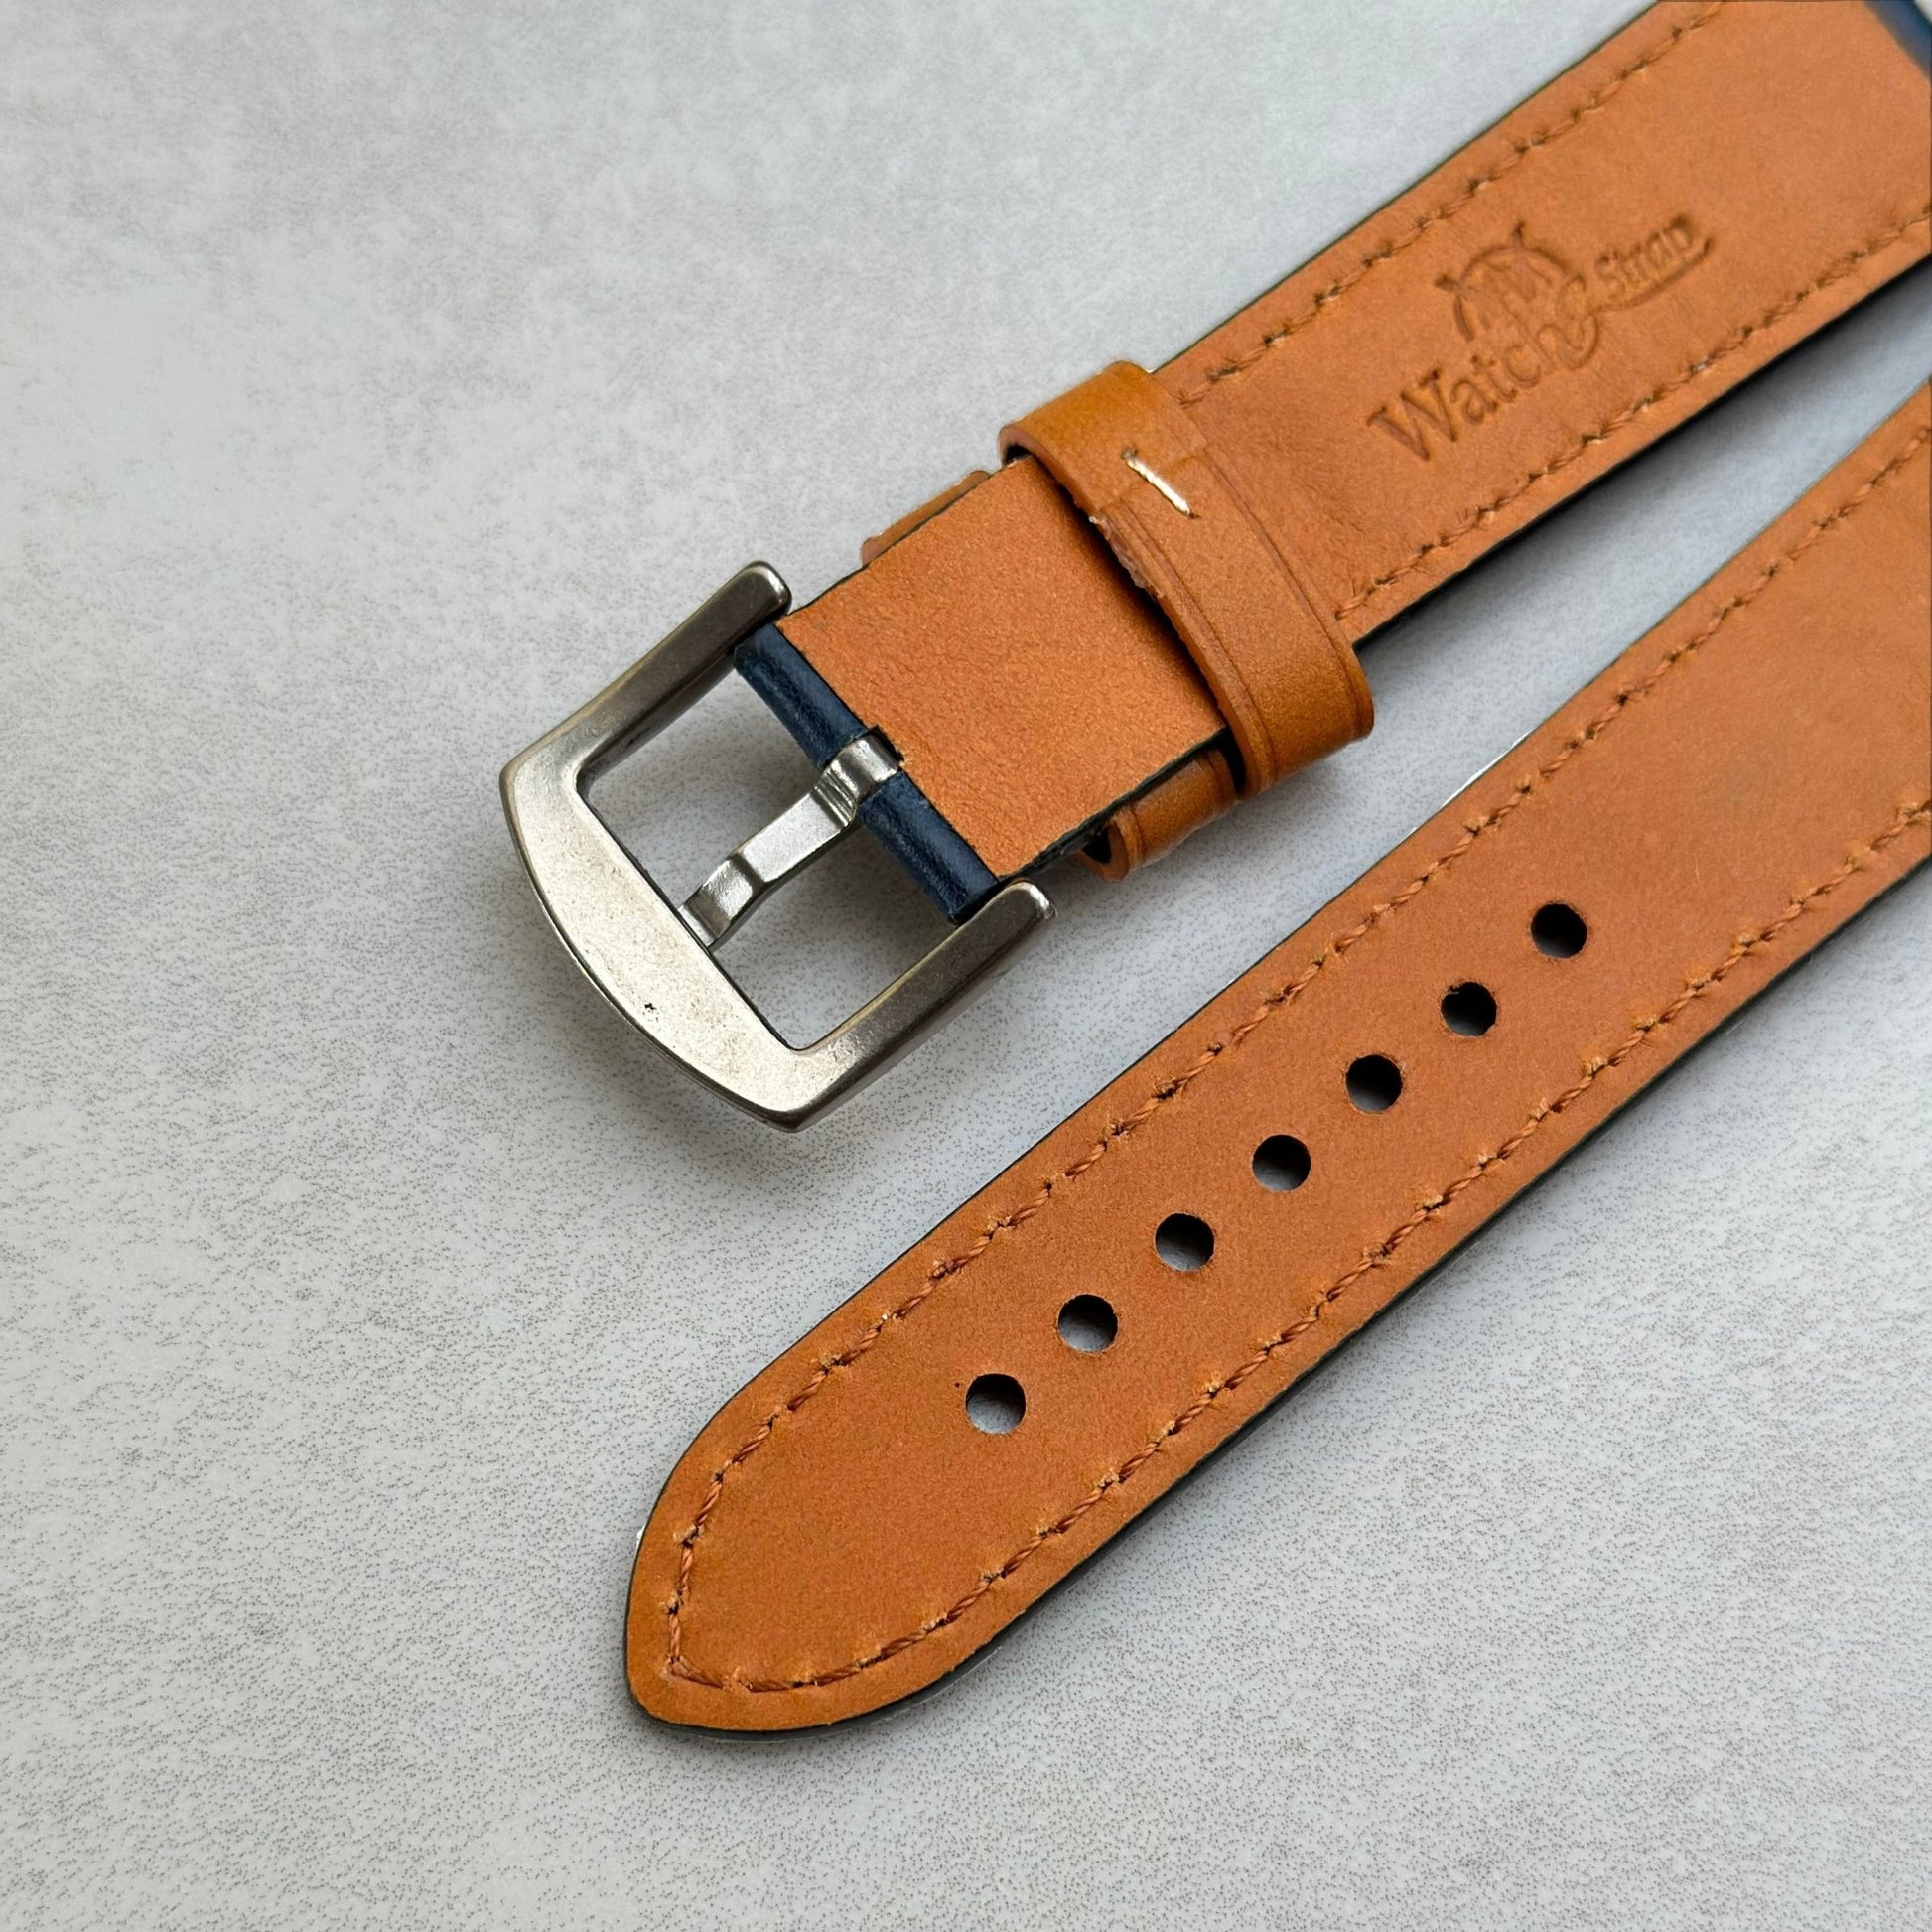 Underside buckle of the Oxford blue full grain leather watch strap. Watch And Strap